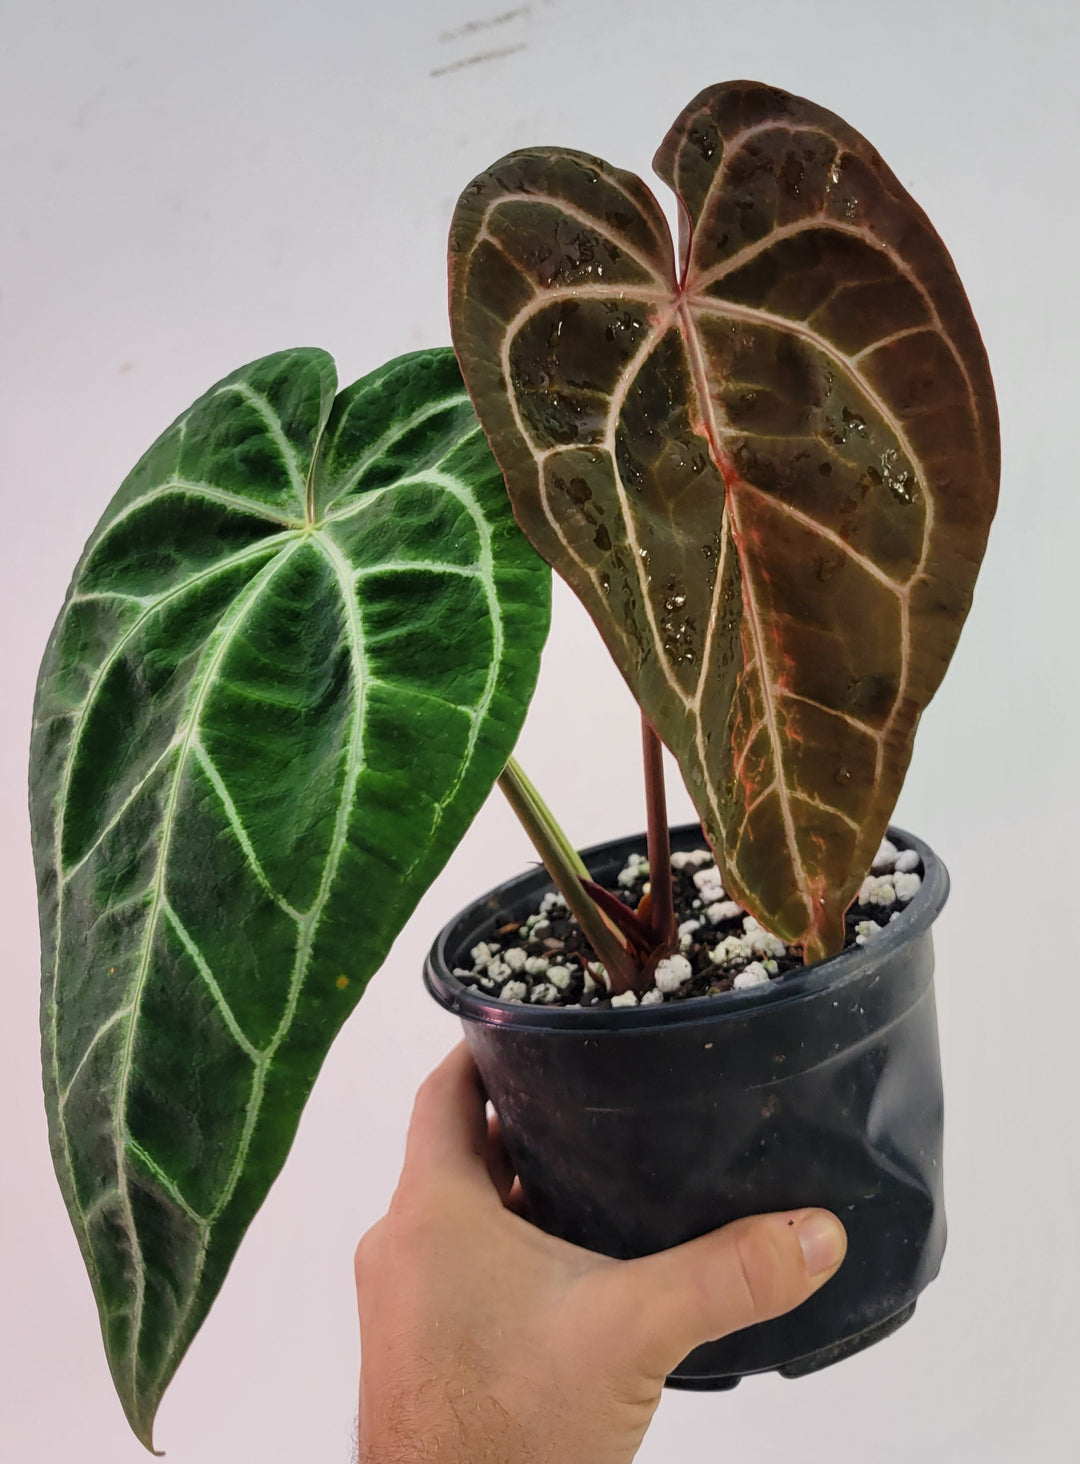 Anthurium Doc Block F2 x Hoffmannii Select Narrow 6in-  #G43